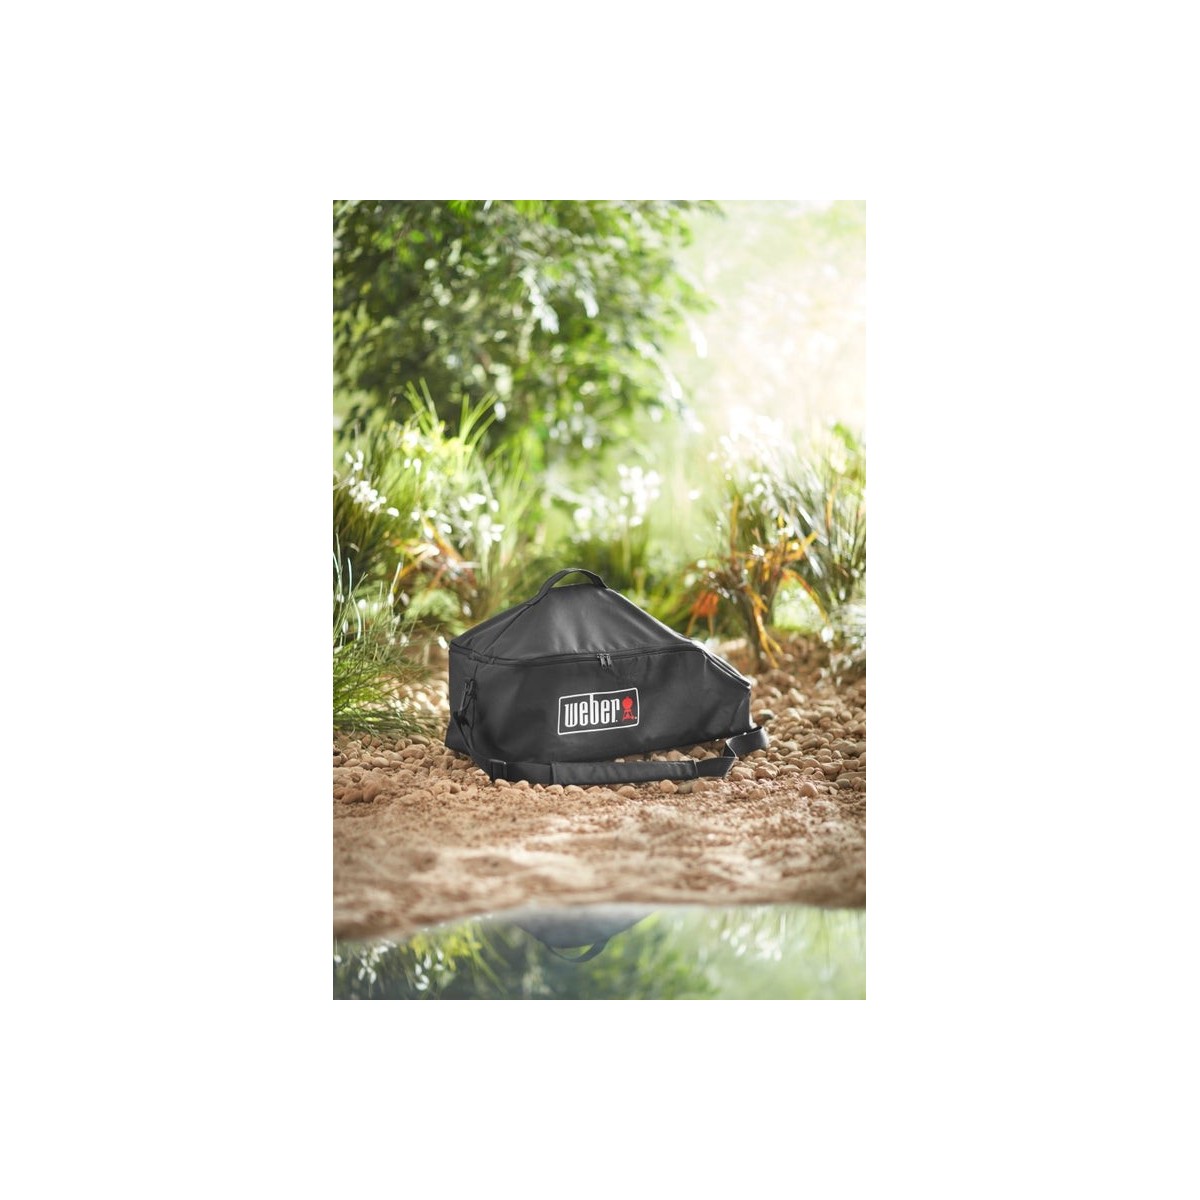 WEBER Premium Barbecue Cover - Fits Go-Anywhere, 7160